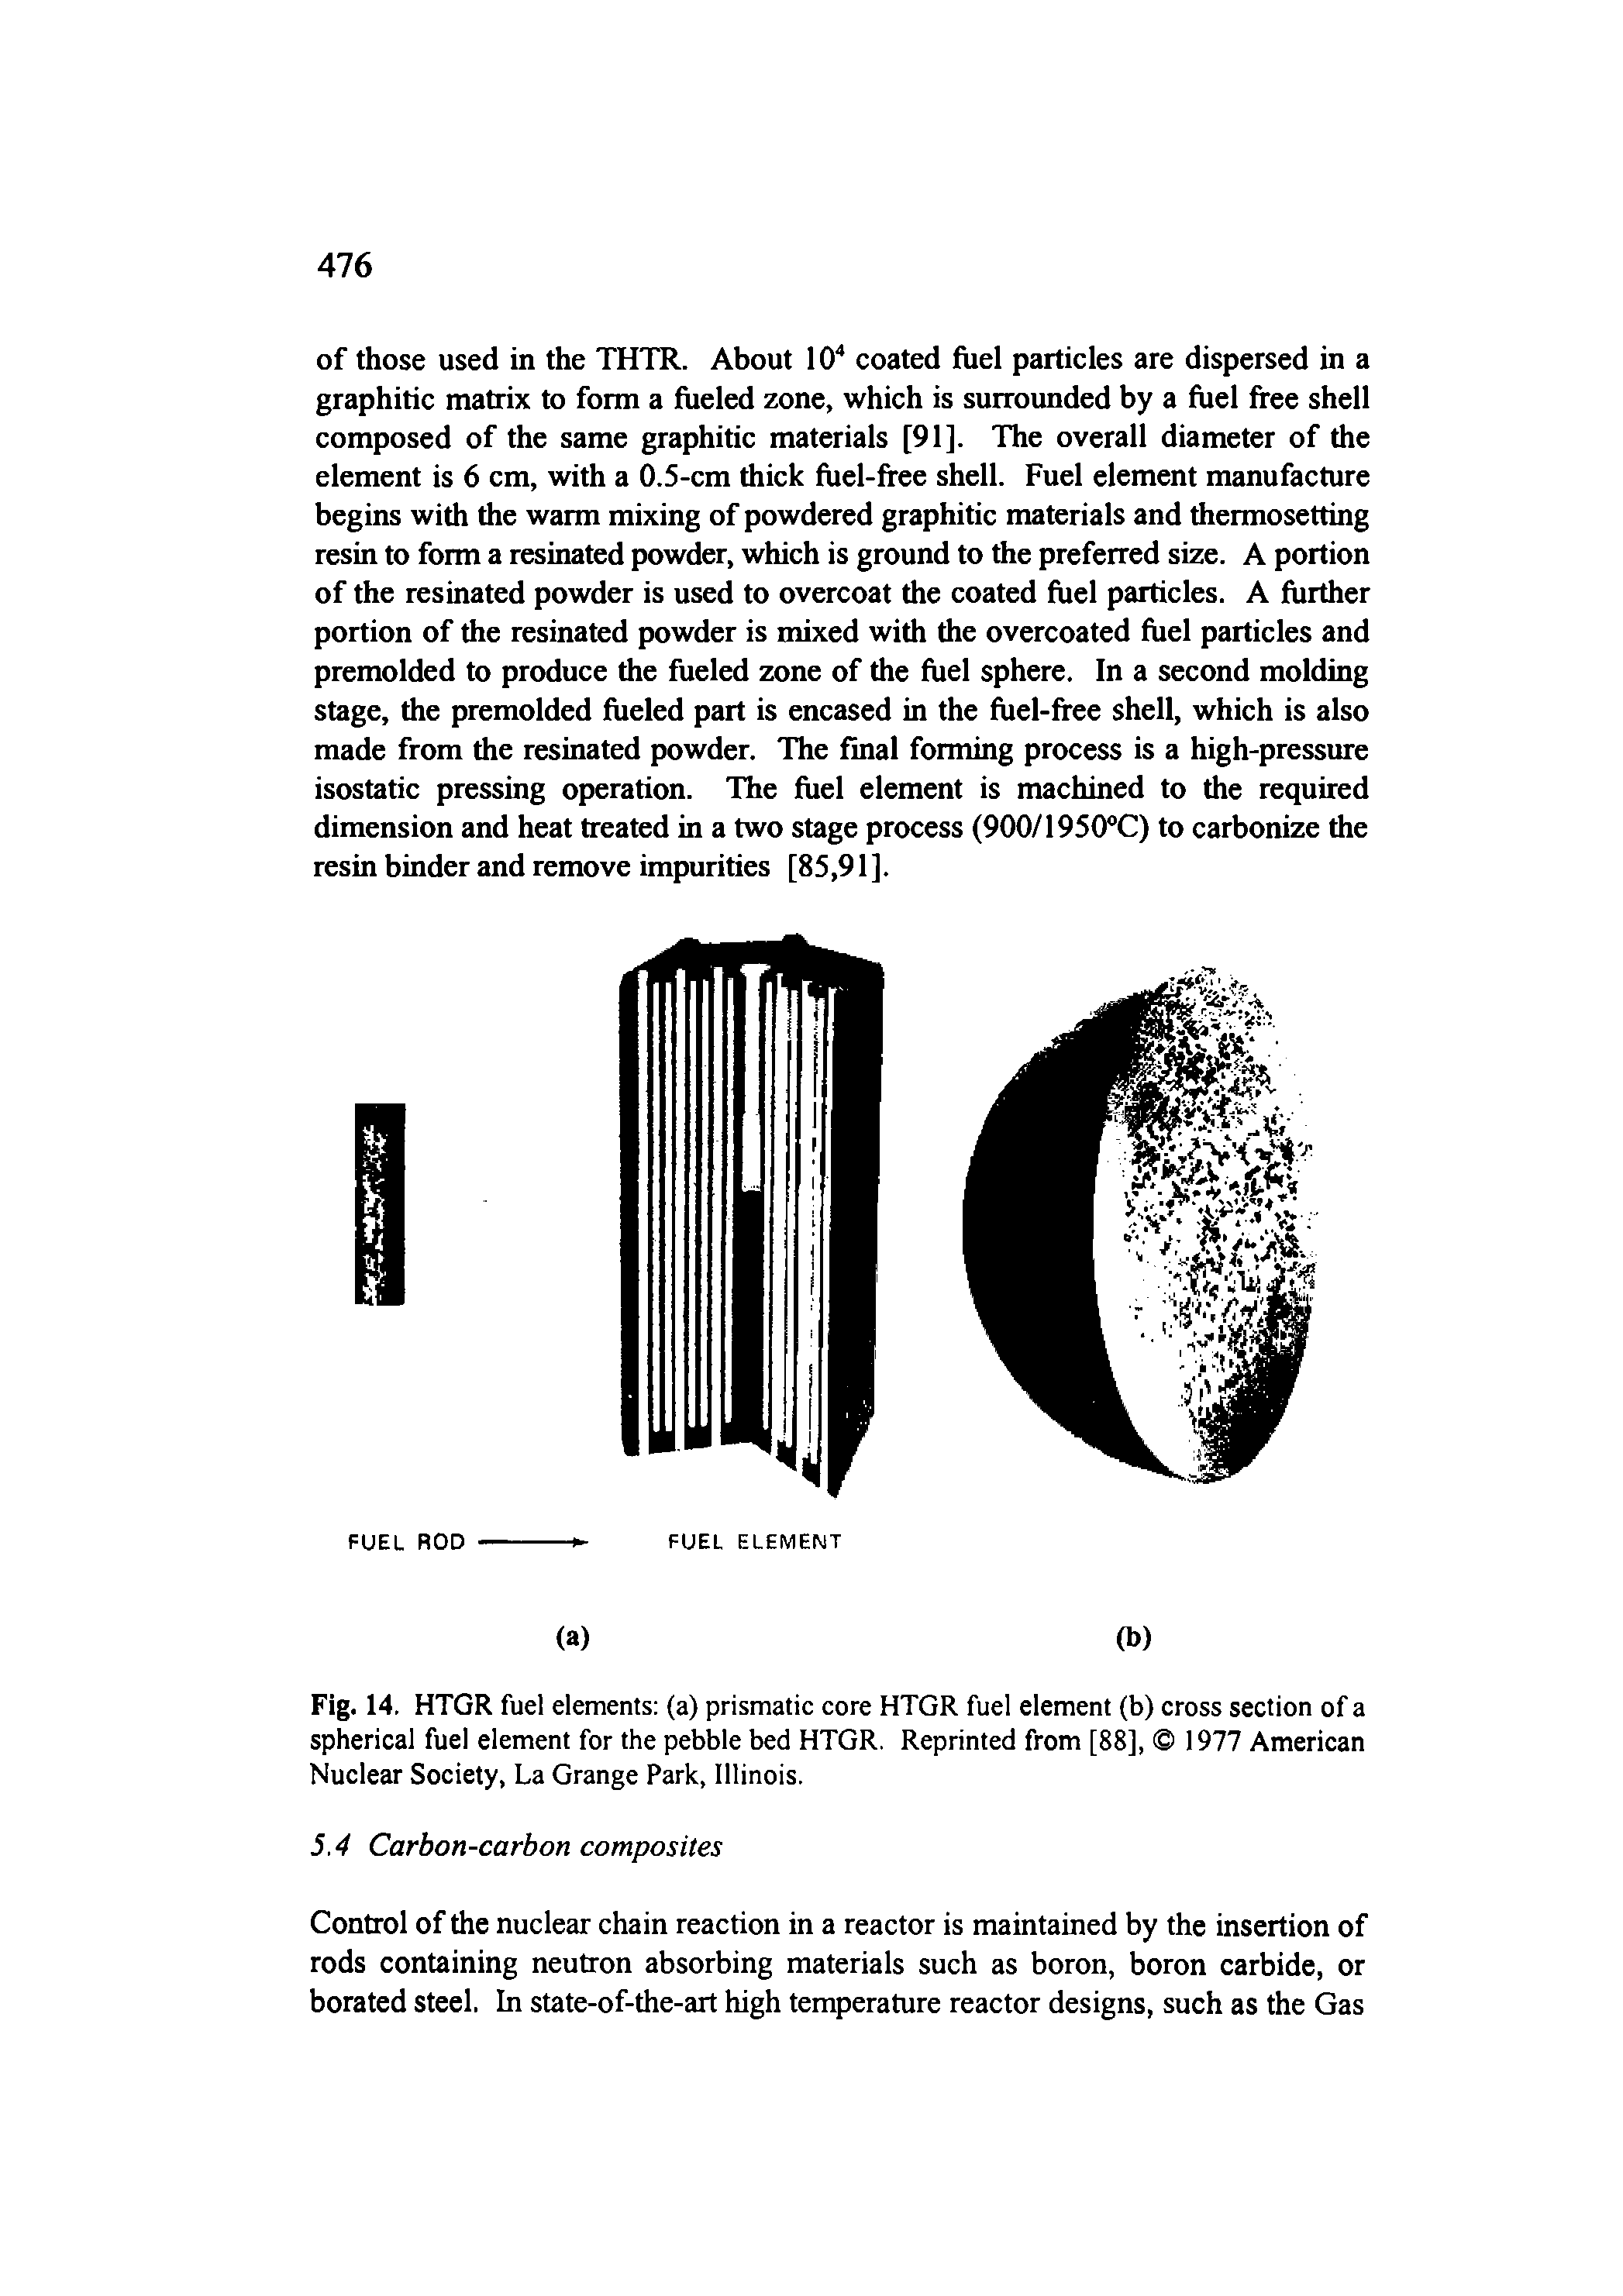 Fig. 14. HTGR fuel elements (a) prismatic core HTGR fuel element (b) cross section of a spherical fuel element for the pebble bed HTGR. Reprinted from [88], 1977 American Nuclear Society, La Grange Park, Illinois.